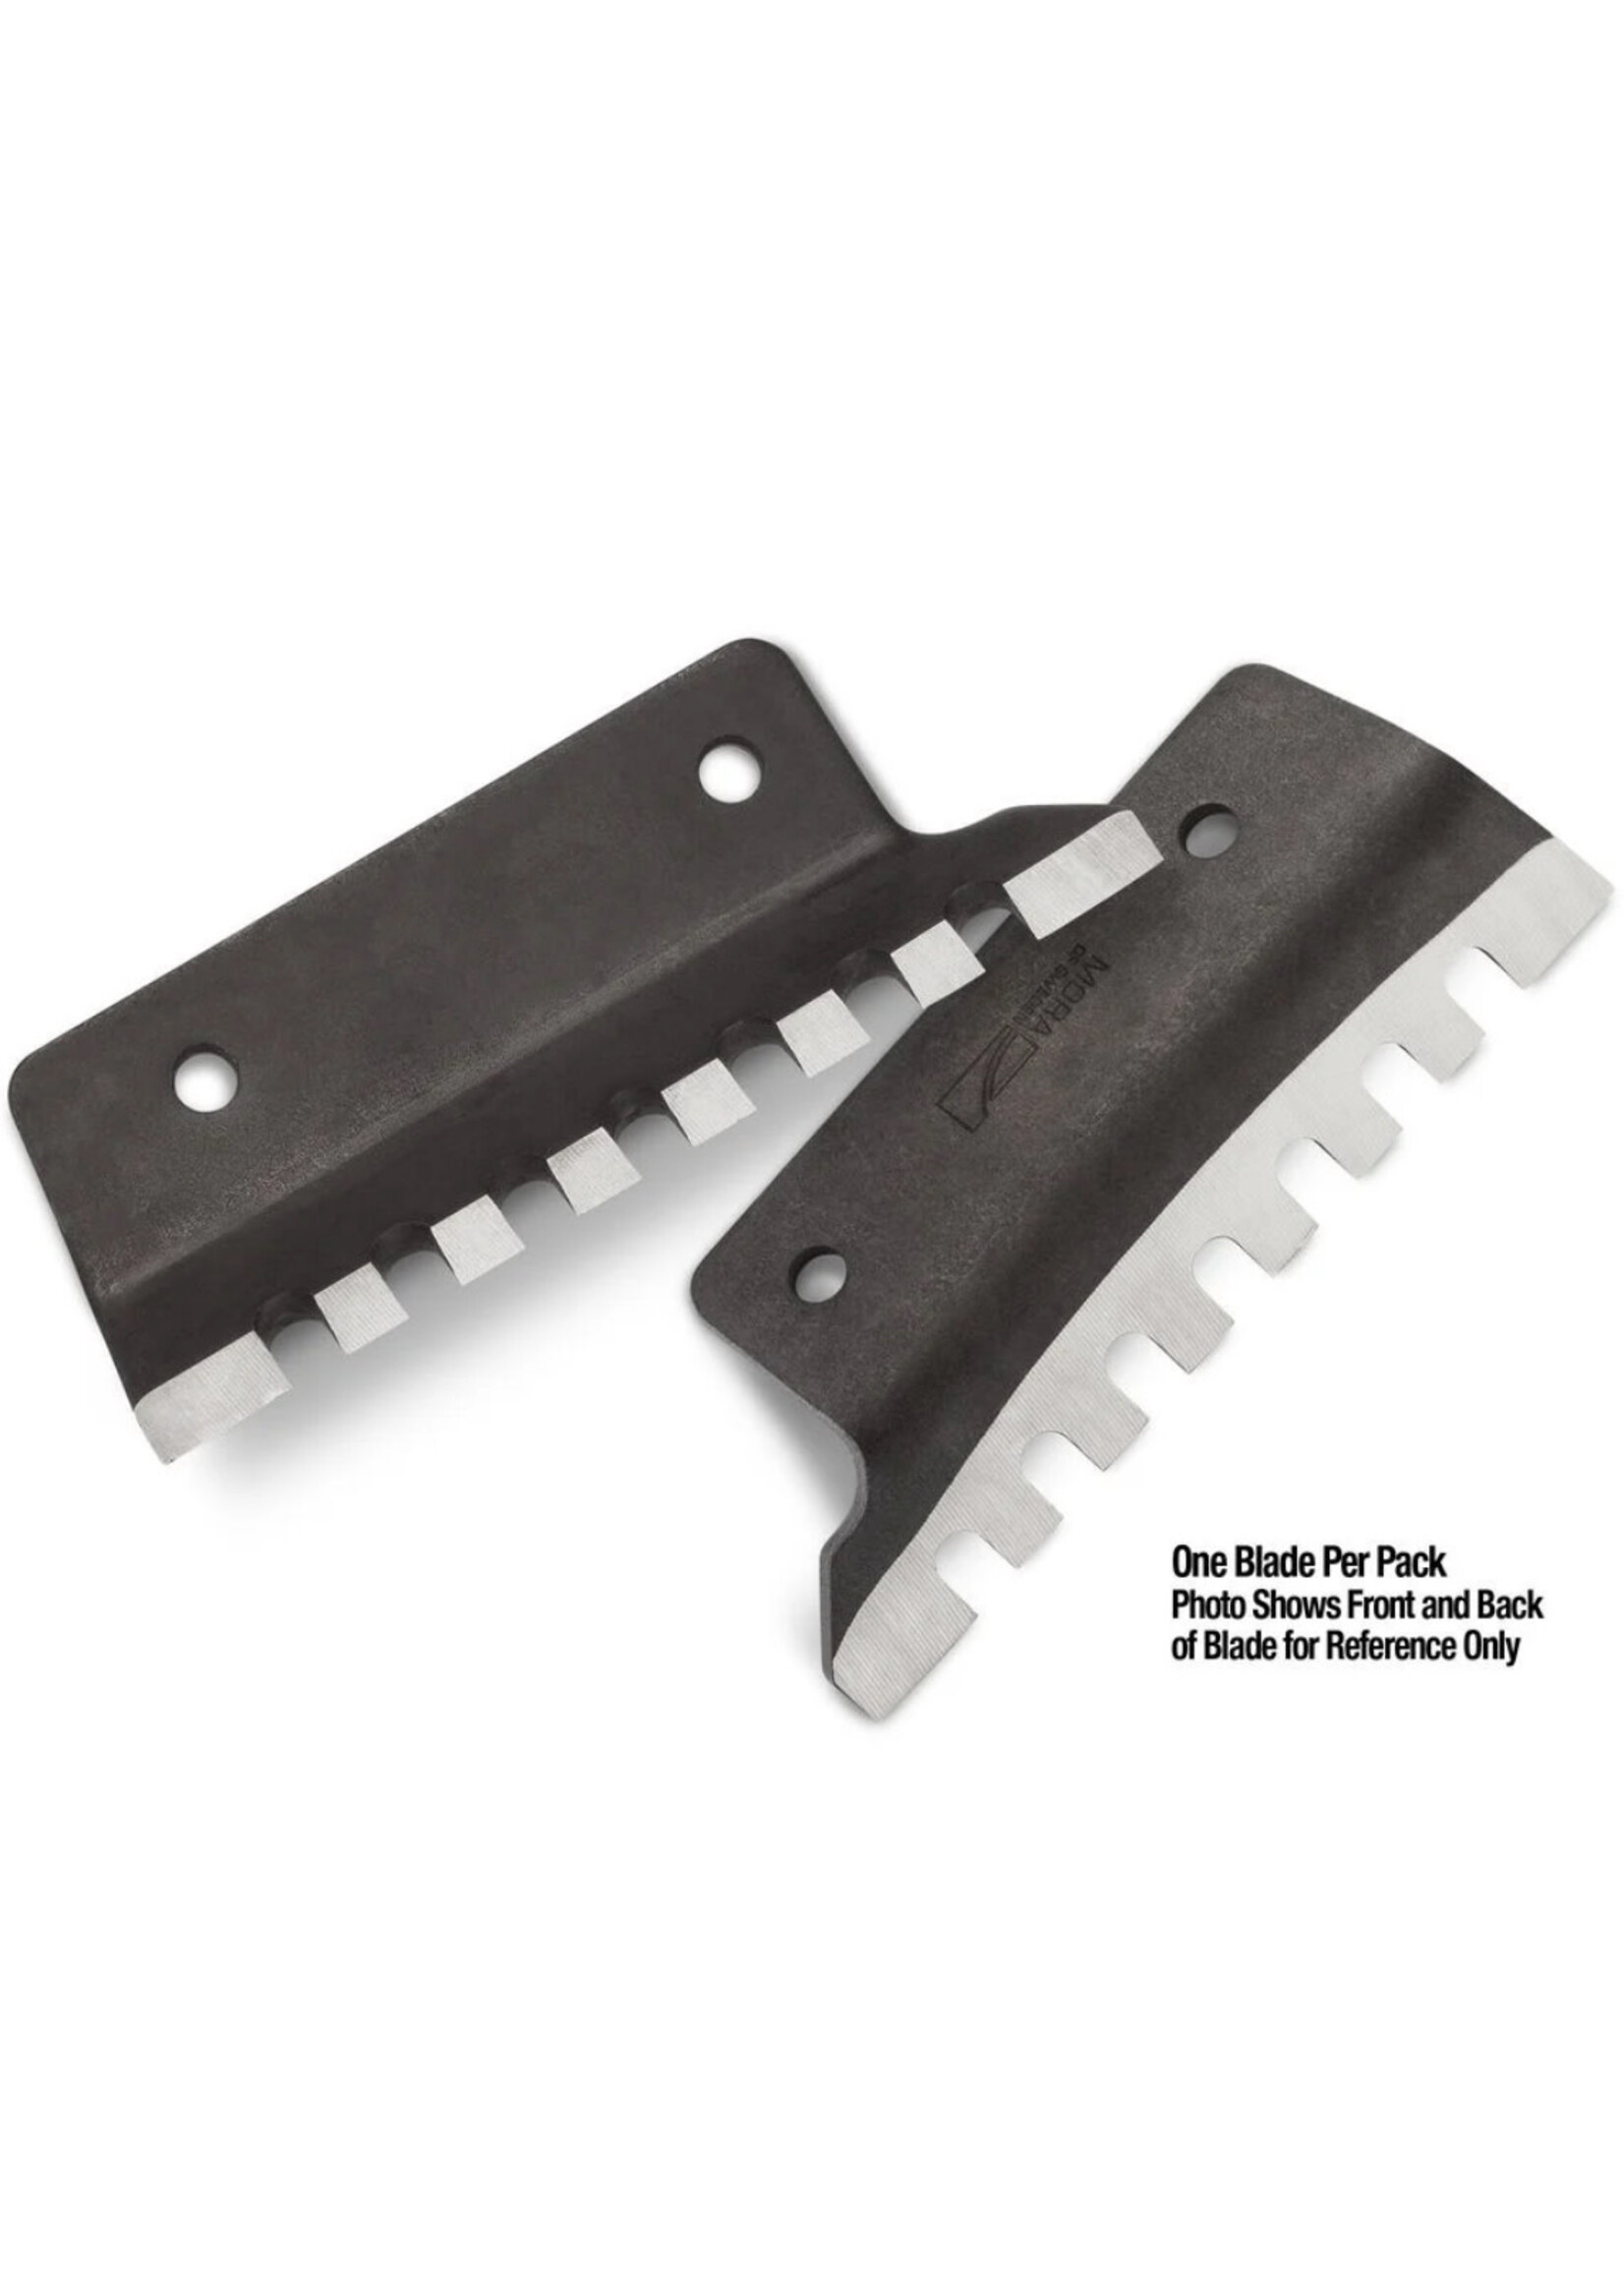 Strikemaster STRIKE MASTER REPLACEMENT AUGER BLADES MB CHIPPER POWER DRILL #MB-25 8.25”